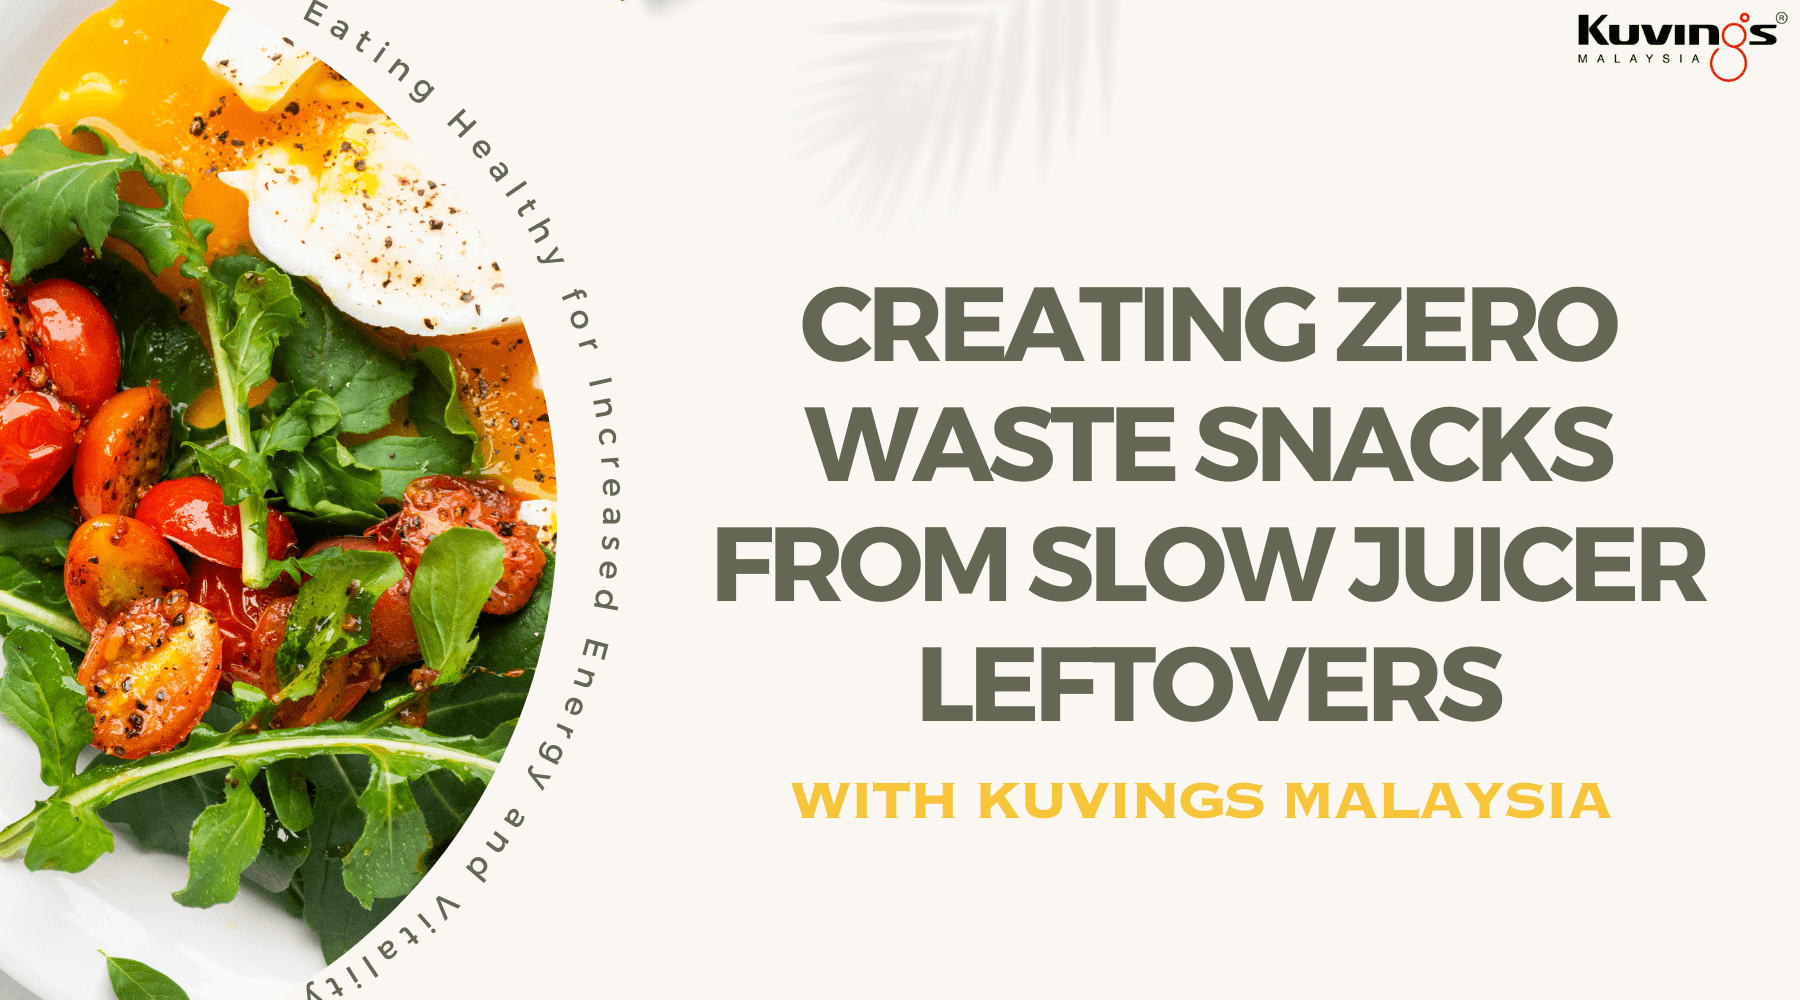 Creating Zero Waste Snacks from Slow Juicer Leftovers - Kuvings.my